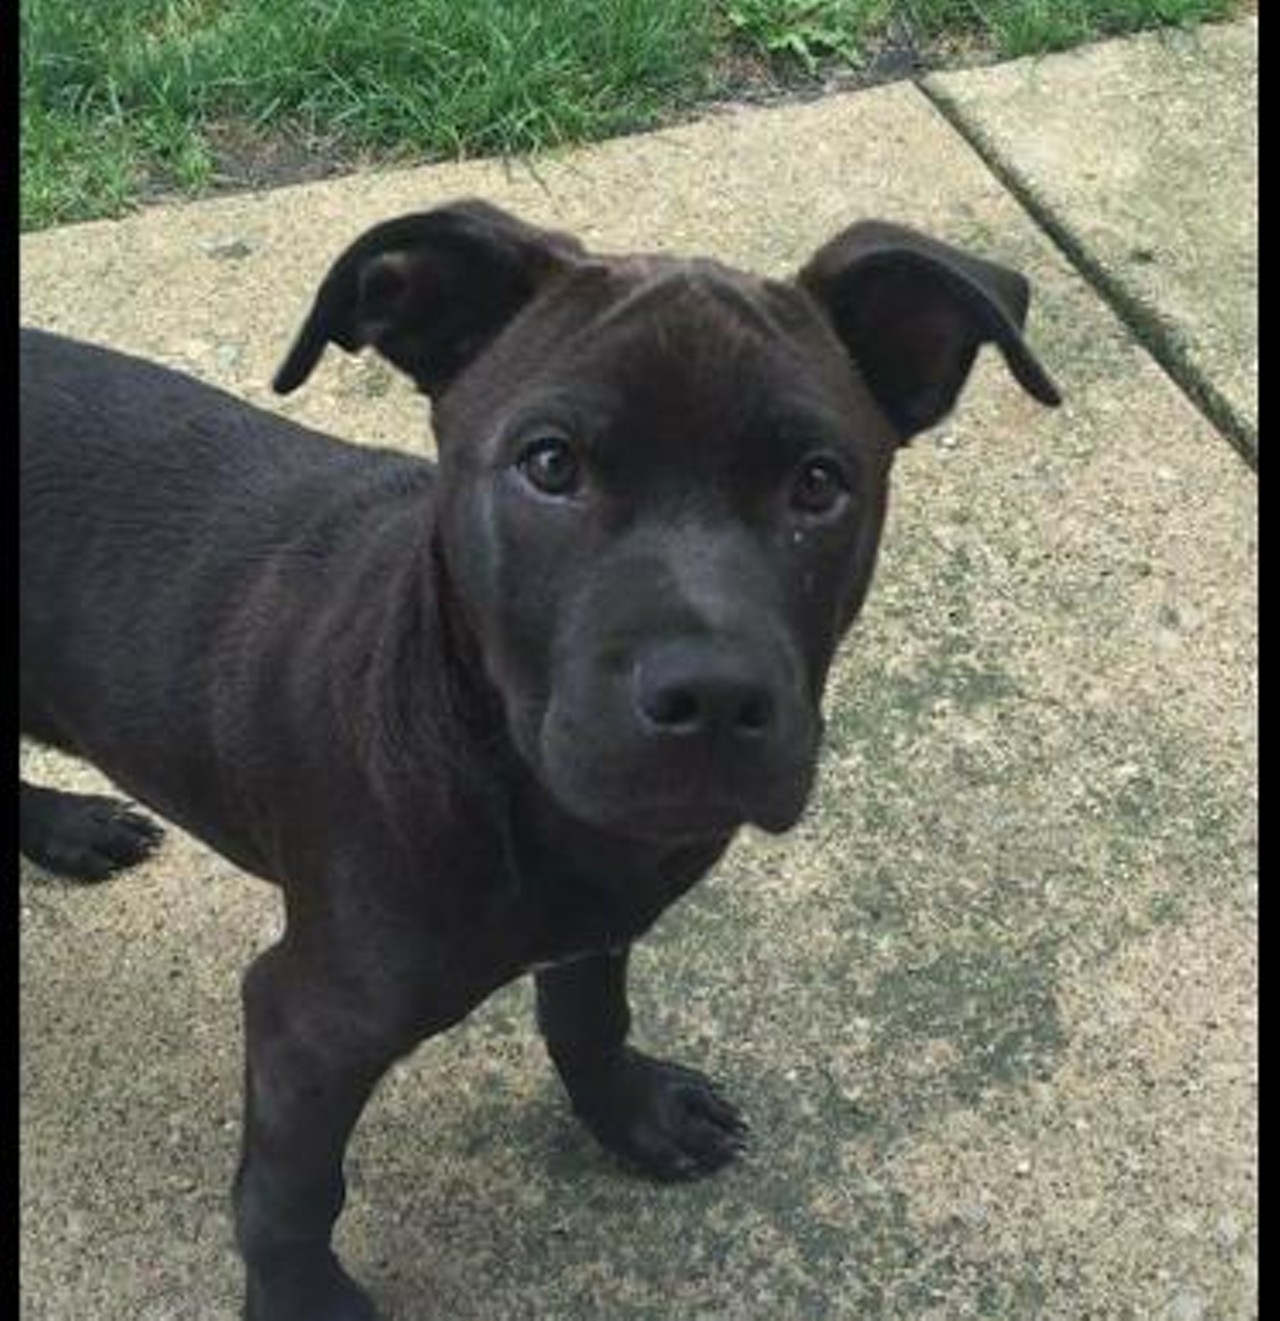  Thor
Cane Corso Mastiff & American Staffordshire Mix | Male | Puppy 
Thor is about to be big as hell. Look out!